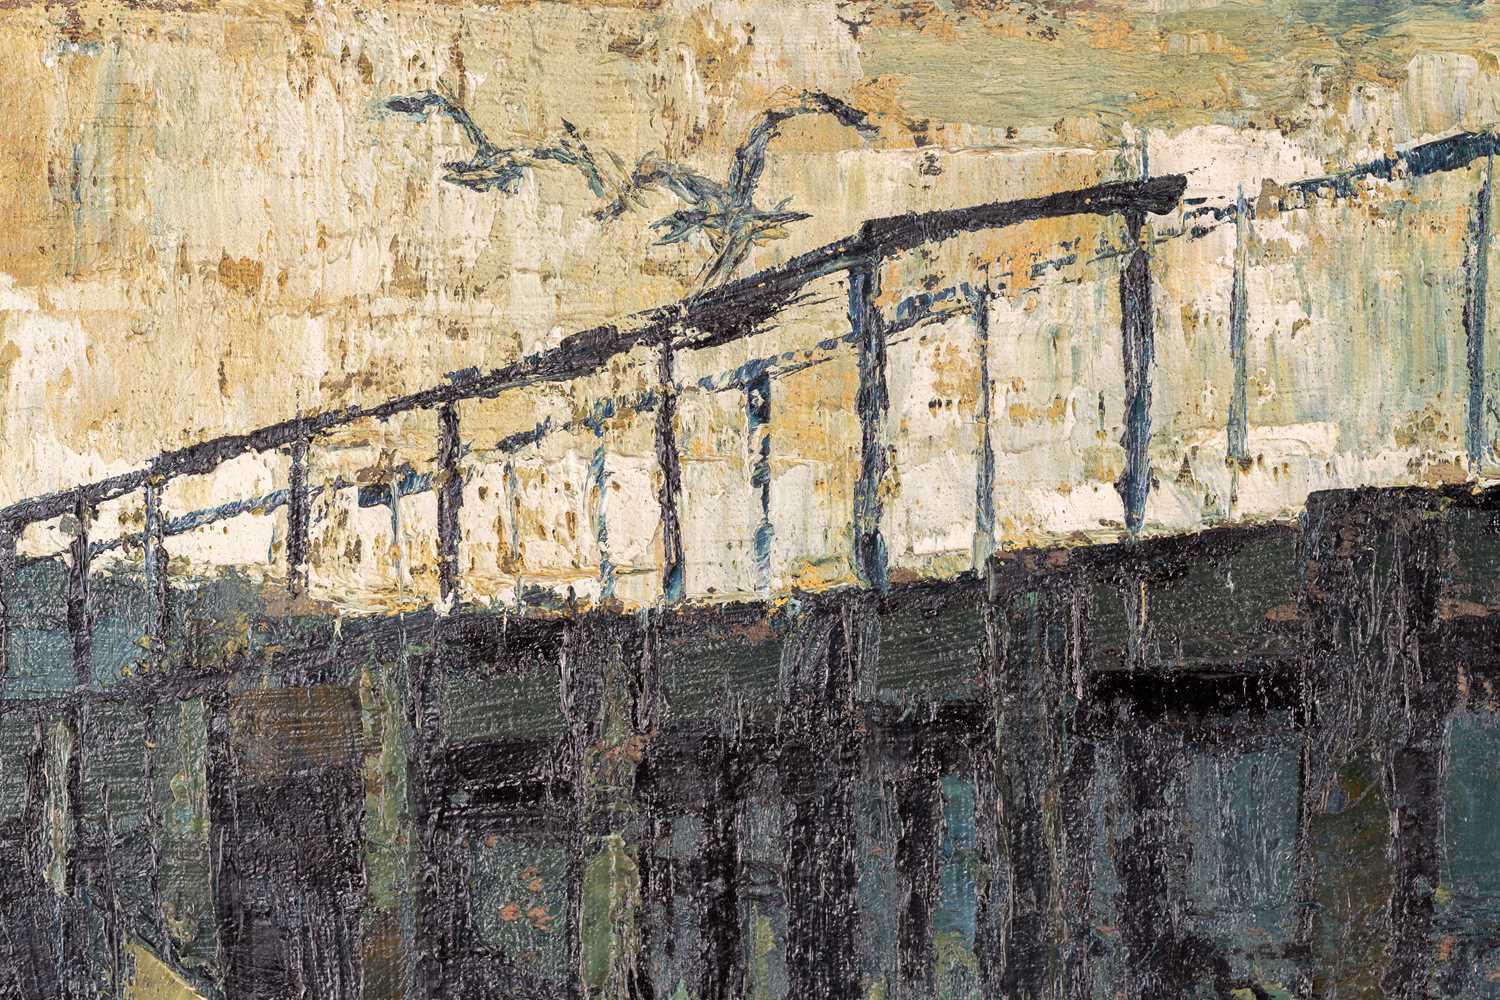 Paul Millichip (b. 1929), View of a pier, signed and dated '55, oil on canvas, framed, 60 x 75 cm - Image 6 of 8